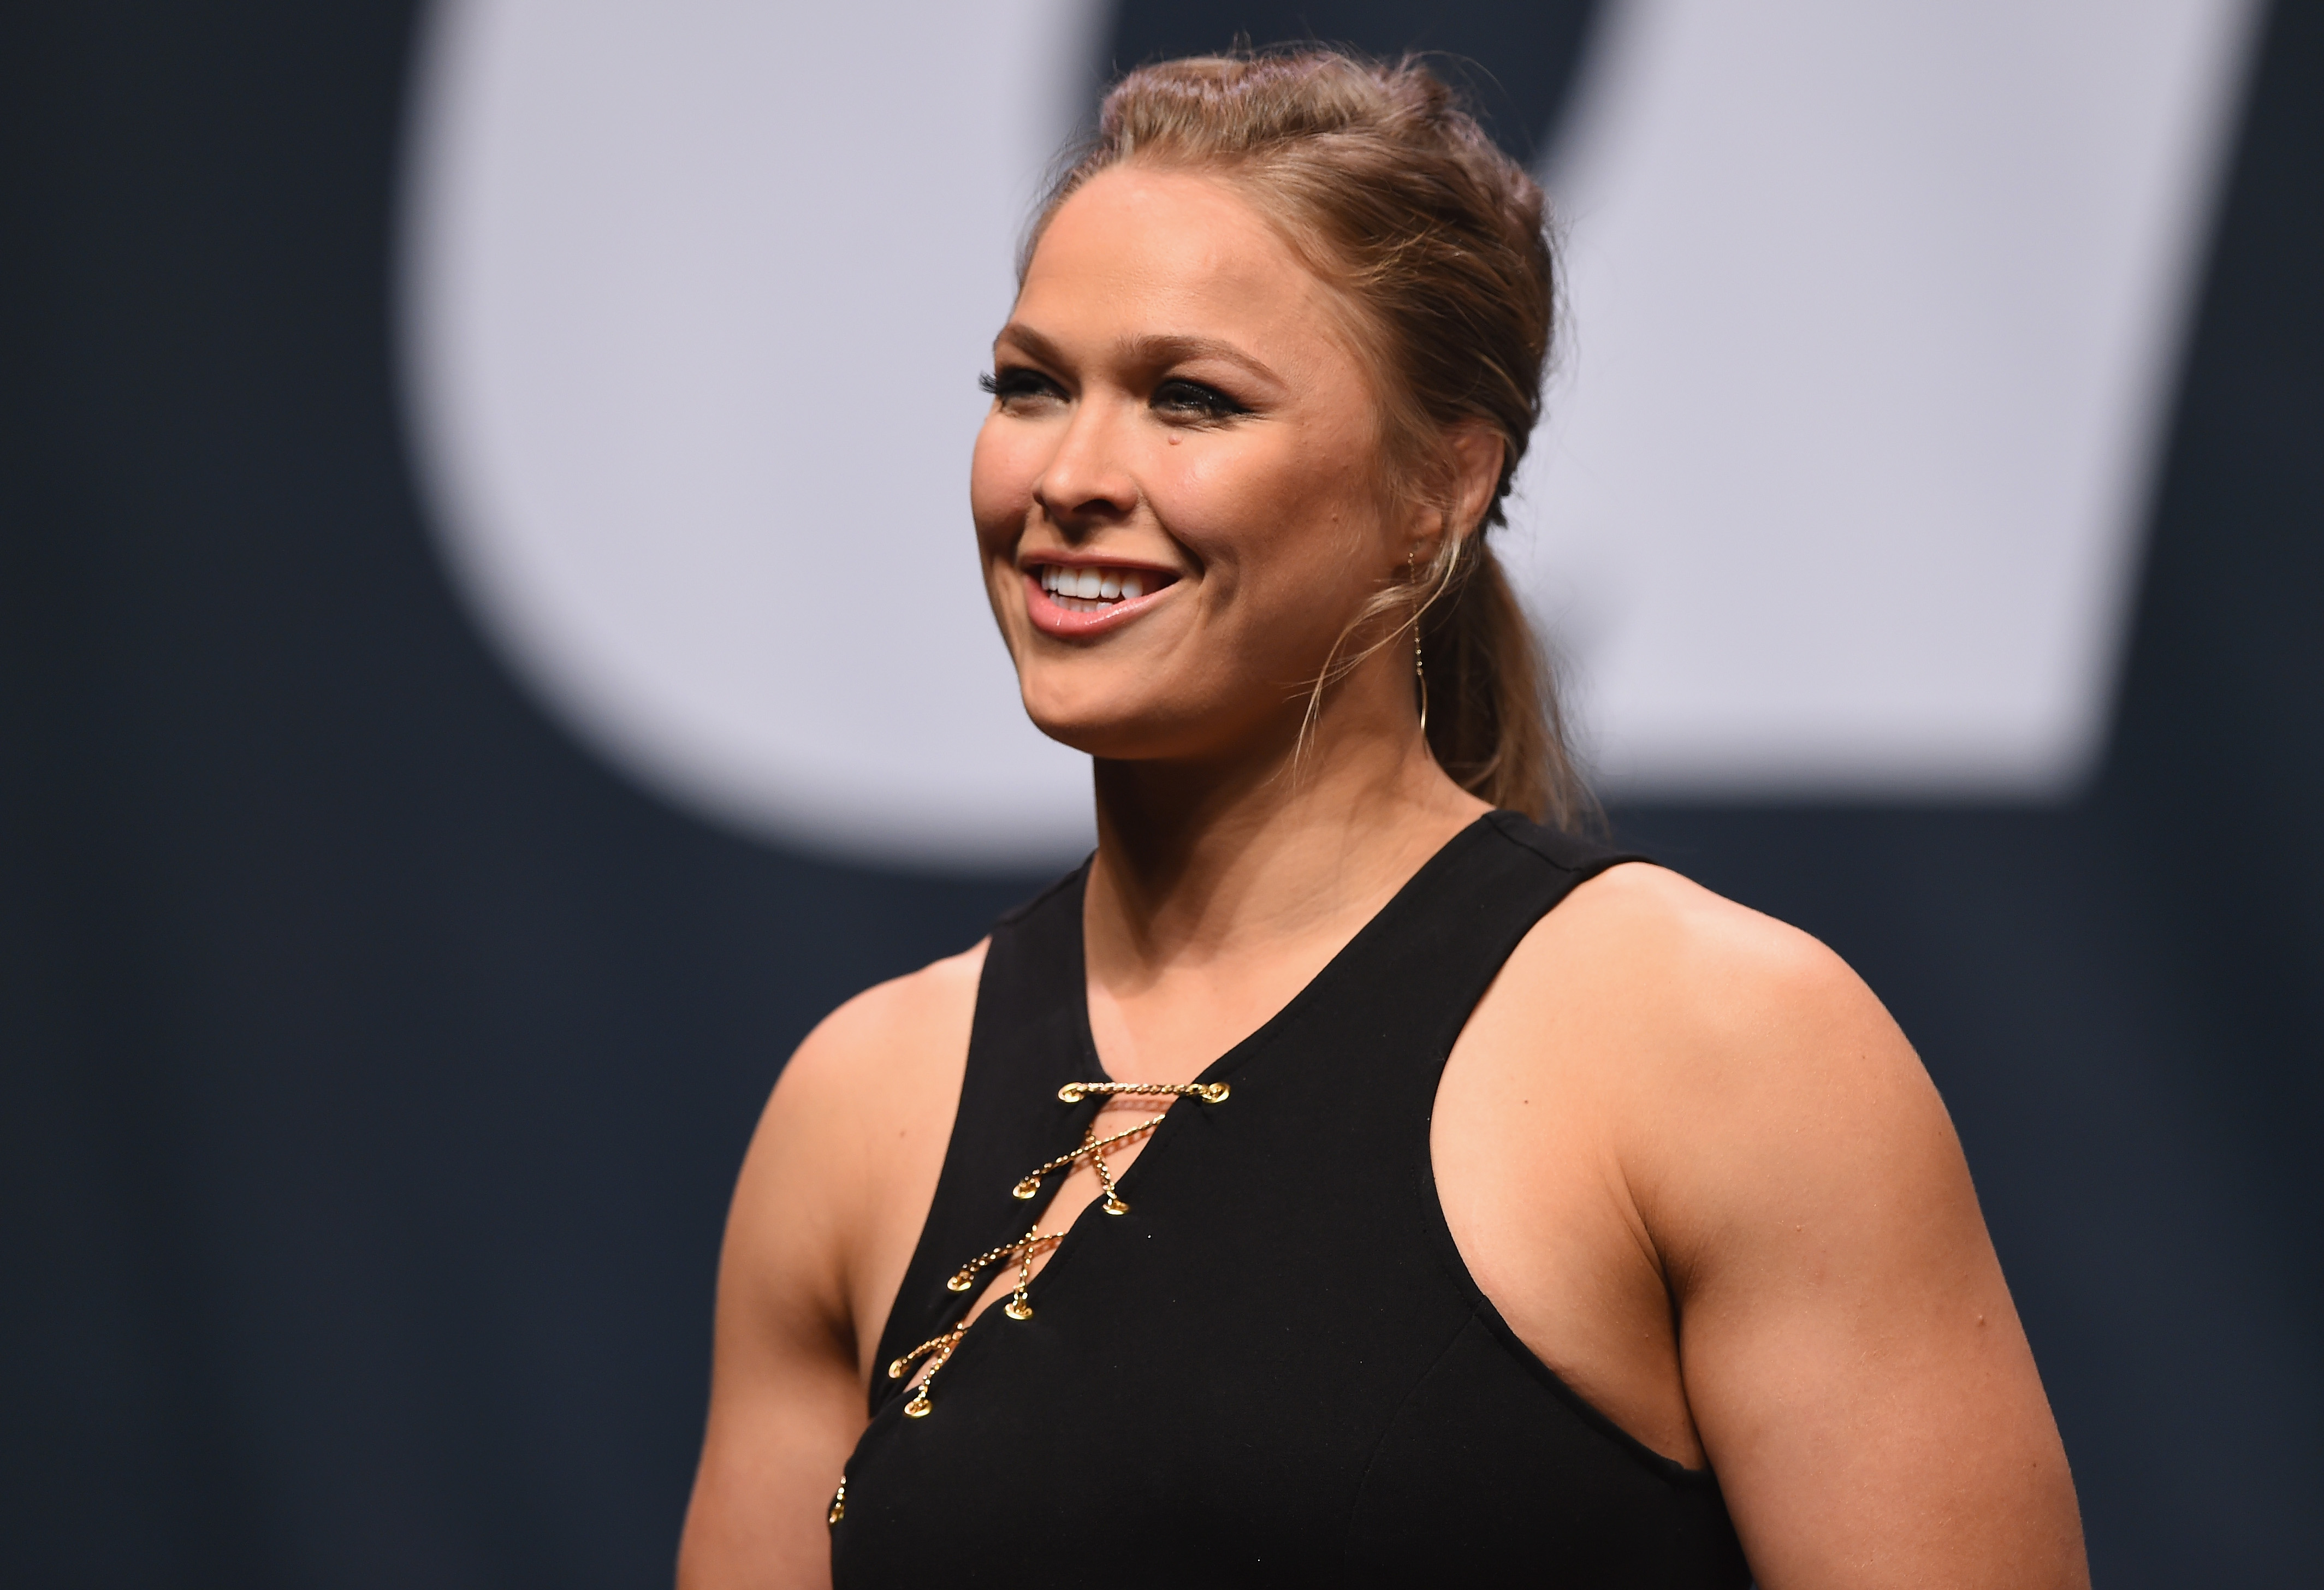 Ronda Rousey at the UFC's Go Big launch event in Las Vegas on Sept. 4, 2015. (Josh Hedges—Zuffa LLC via Getty Images)